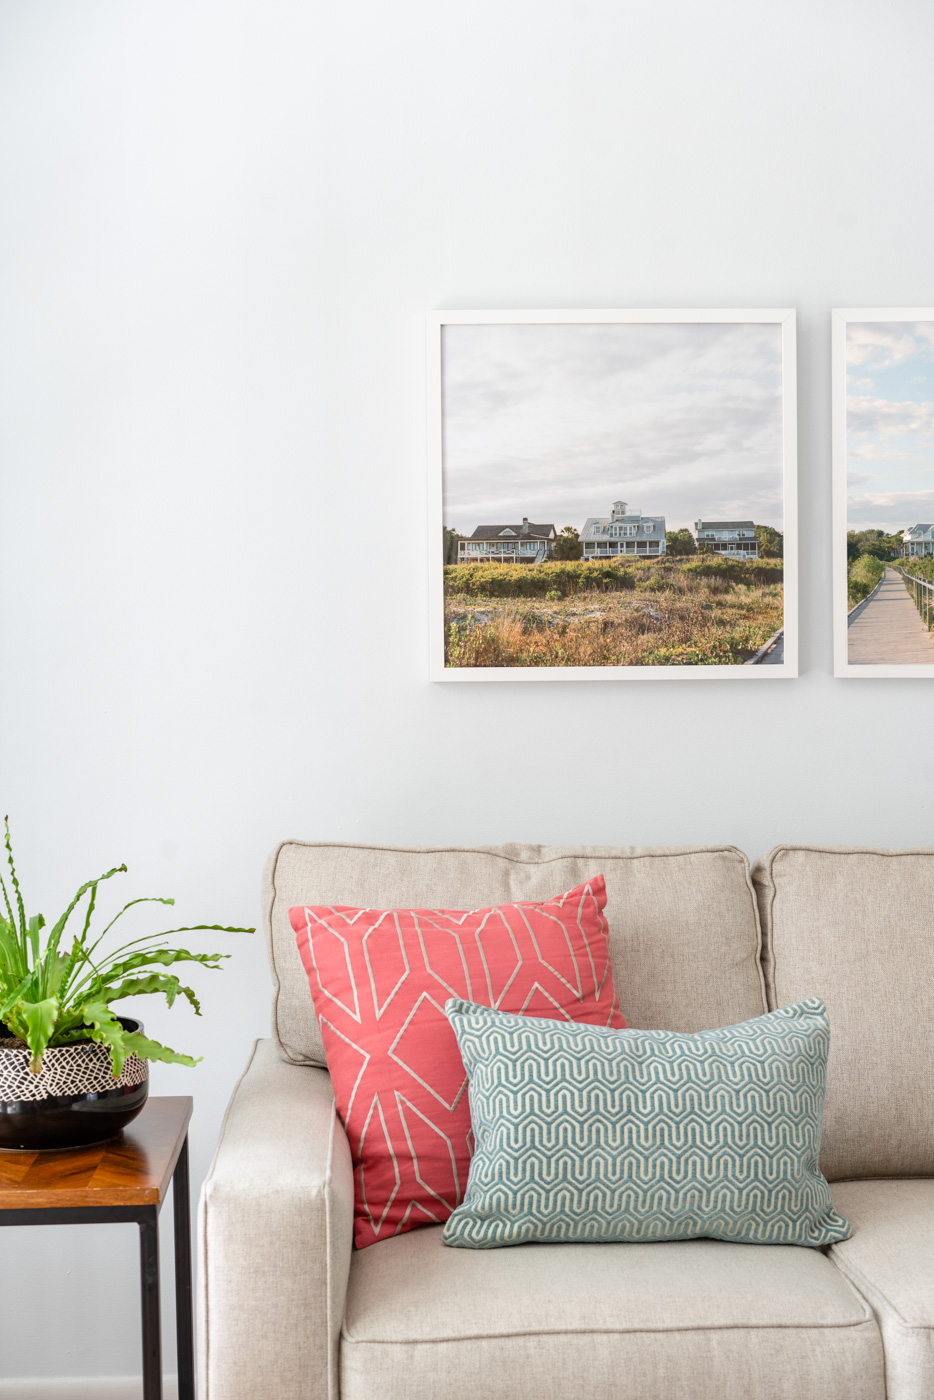 A diptych photograph of beach homes and a walkway on Sullivan's Island, SC hanging over a beige couch with 2 colorful pillows and a plant on the side table